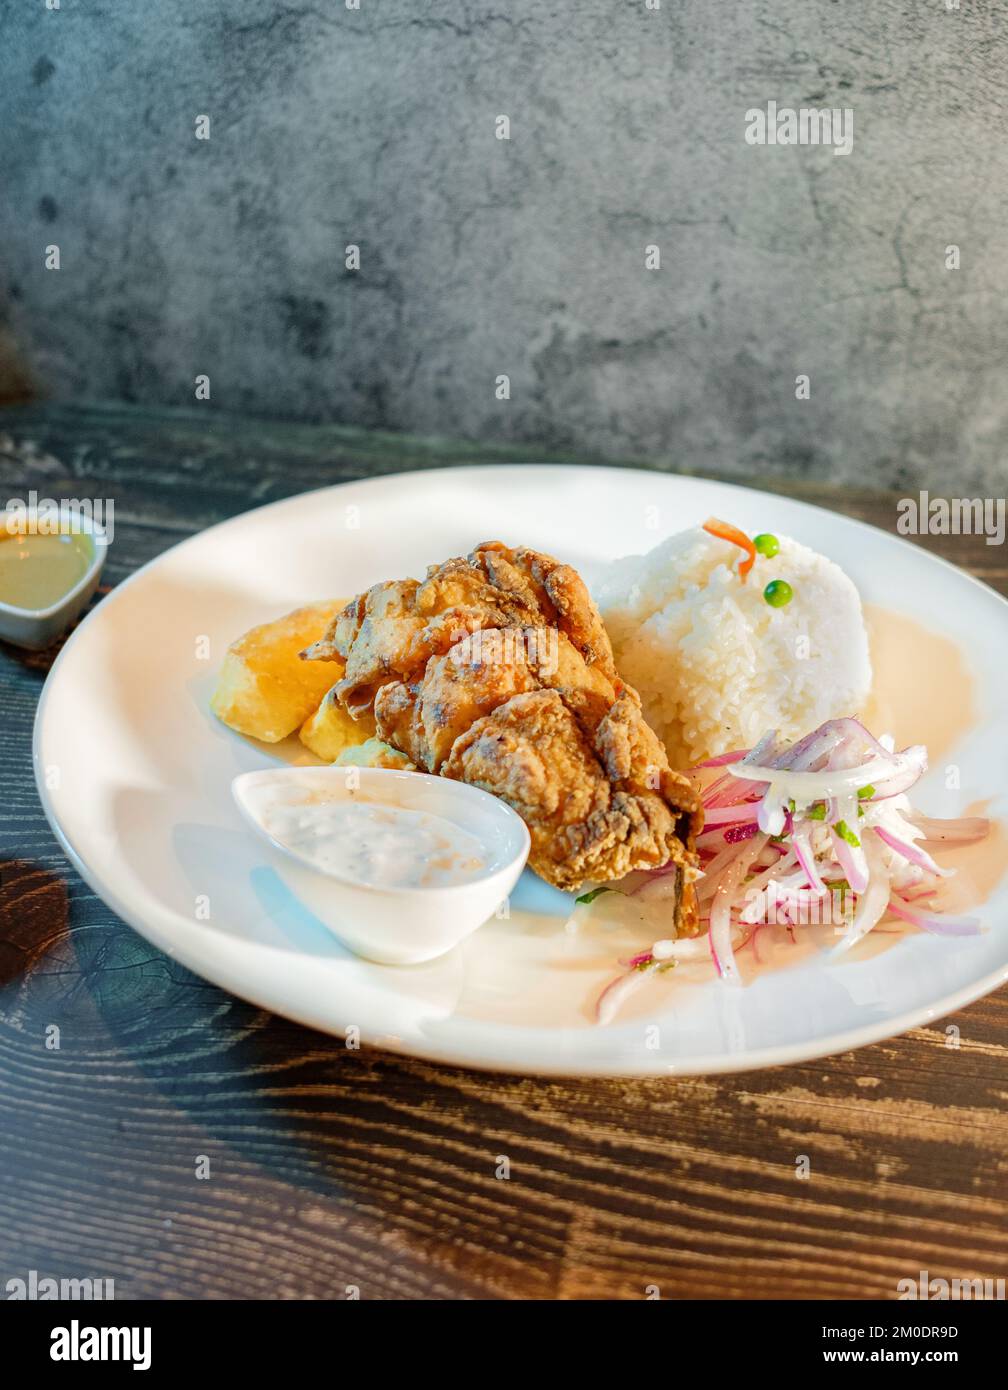 Fried fish filet with white rice, potatoes and salad Stock Photo